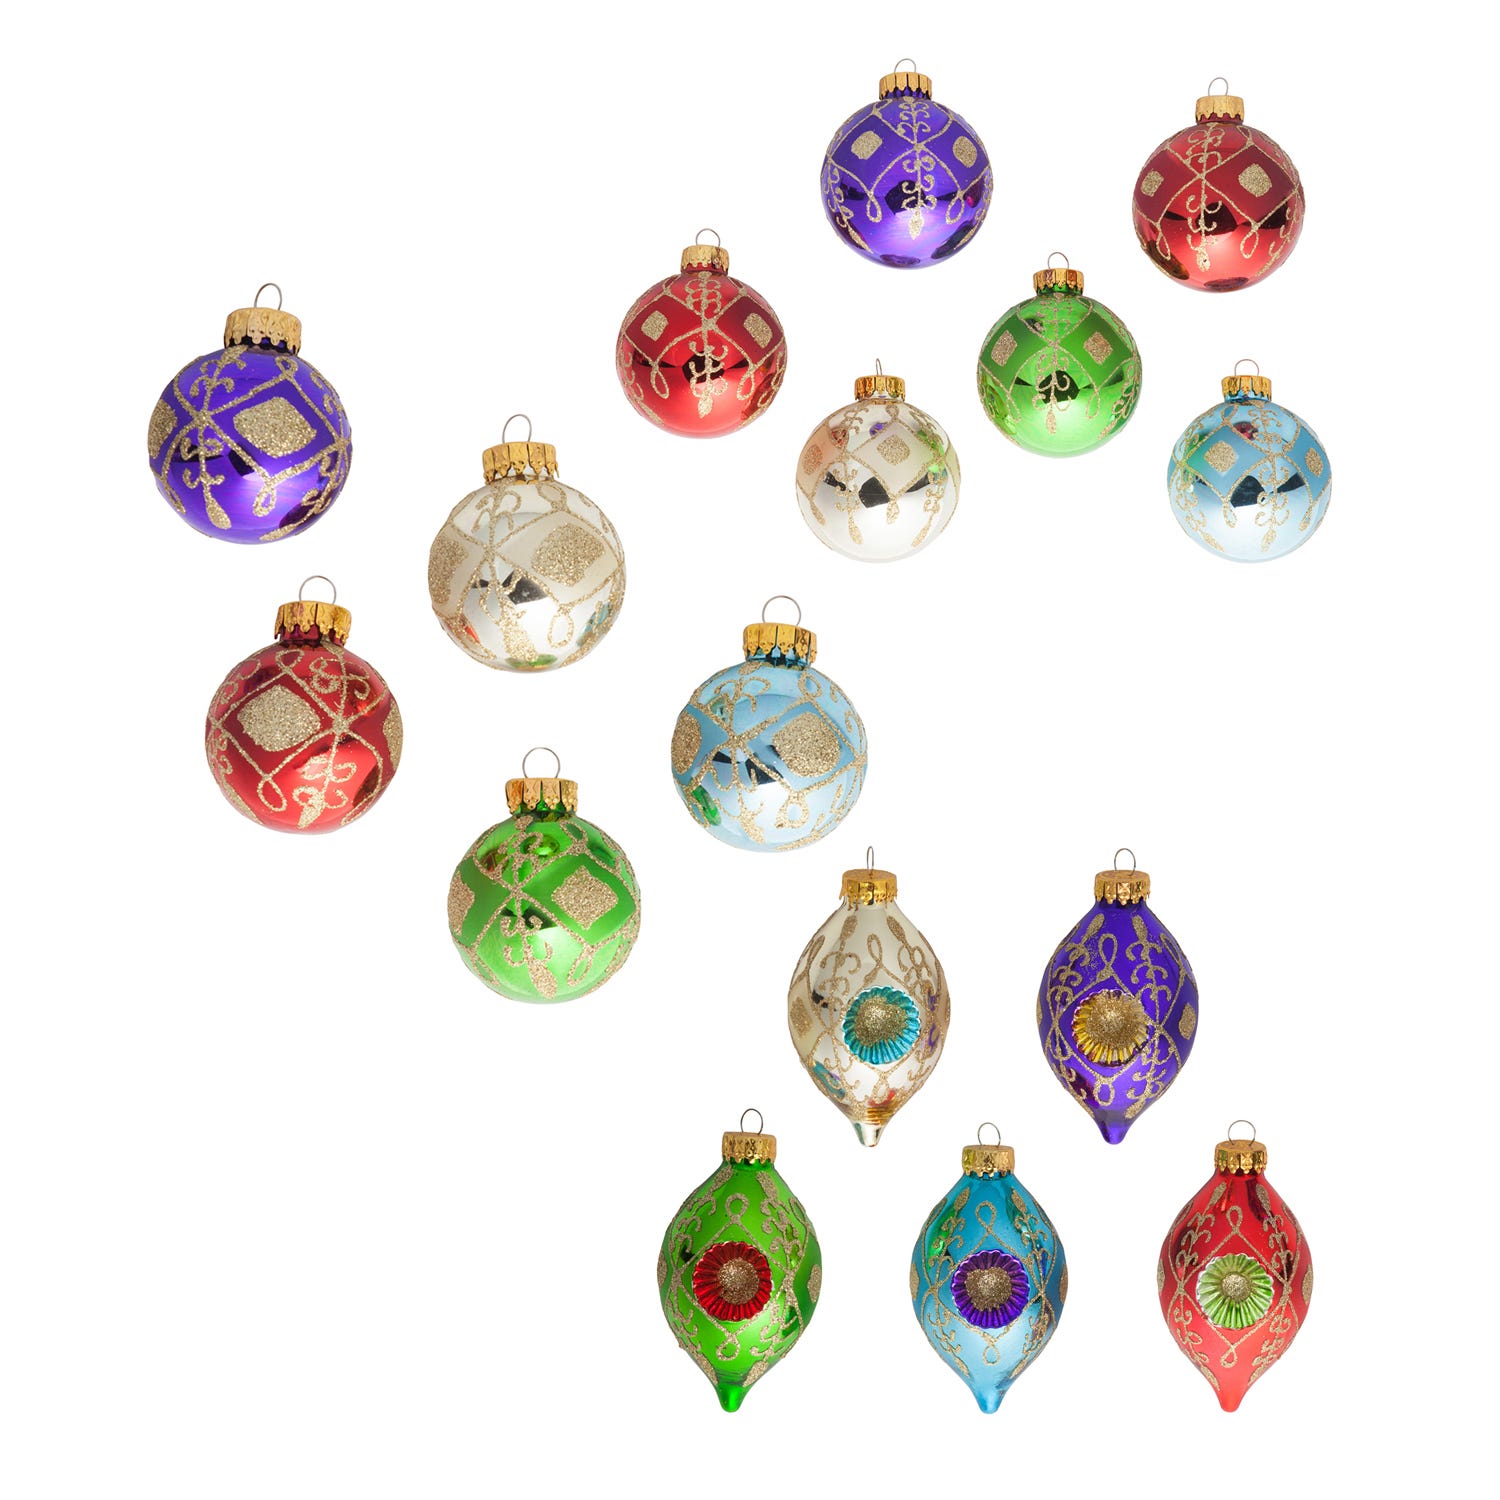 80MM Glass Peacock Ball, Finial and Onion Ornaments, 3 Assorted